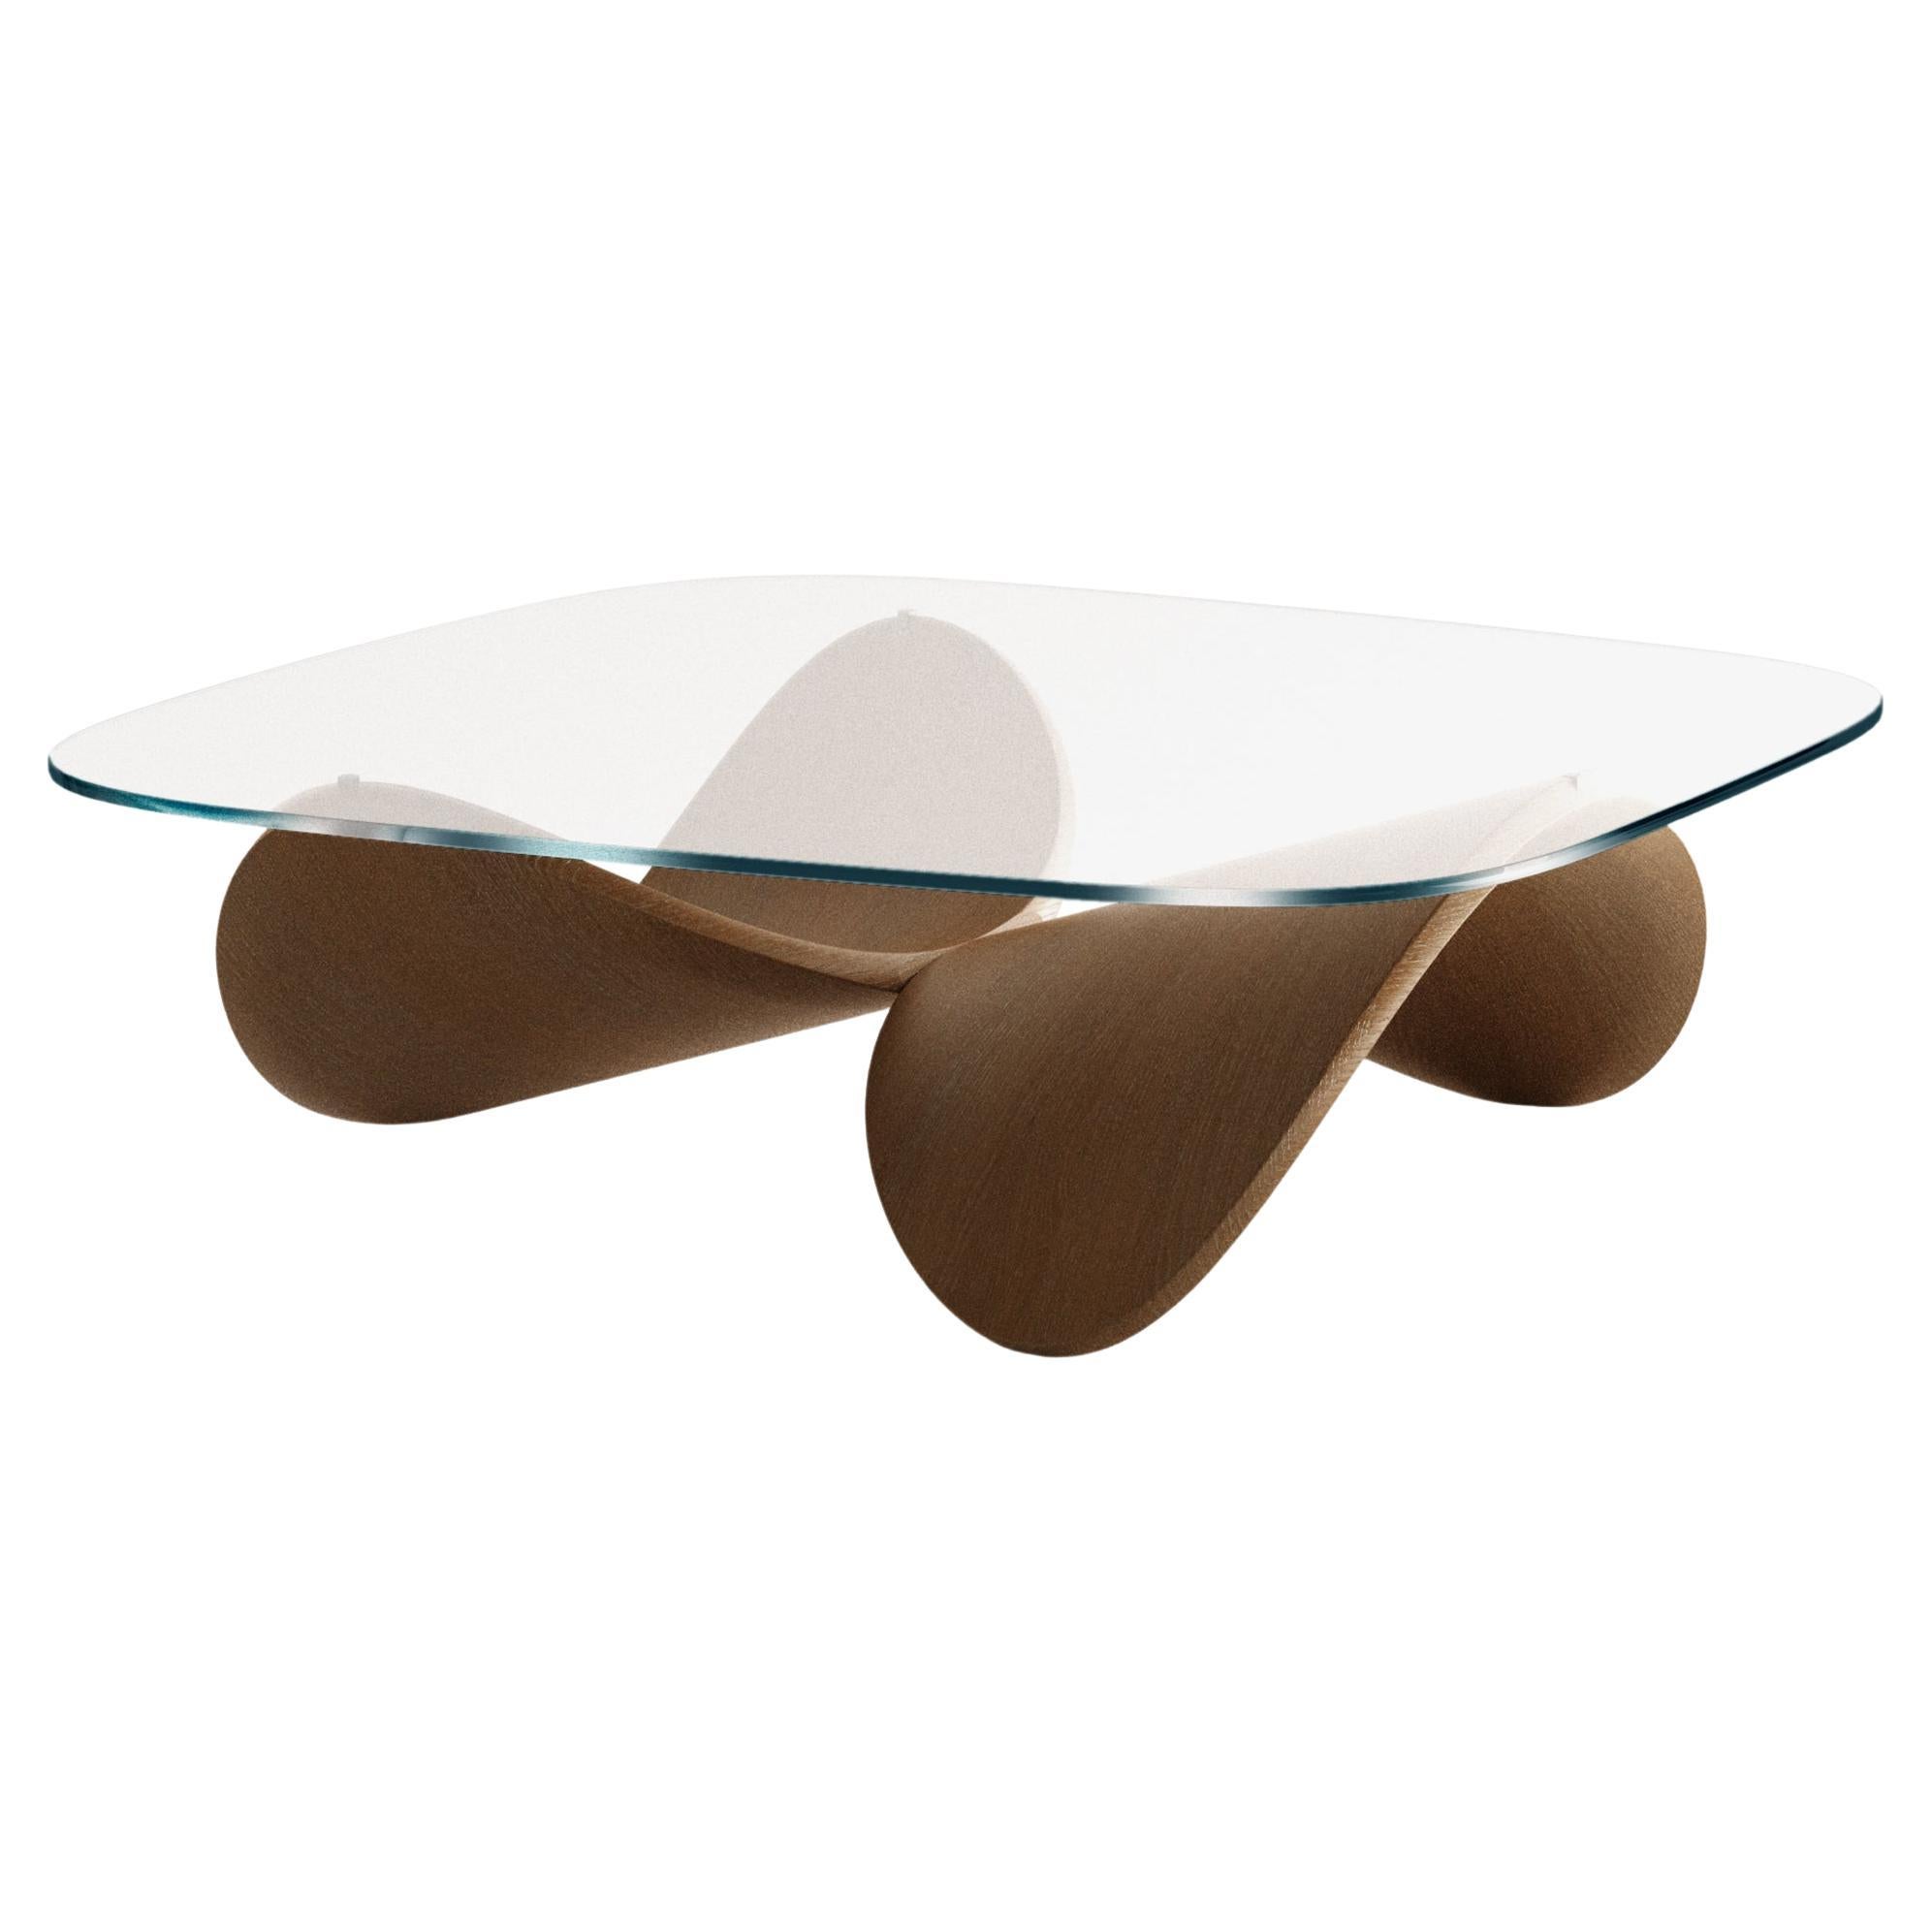 Sculptural Wooden Coffee Table in a Natural Brown Stain and Glass Top, Italy